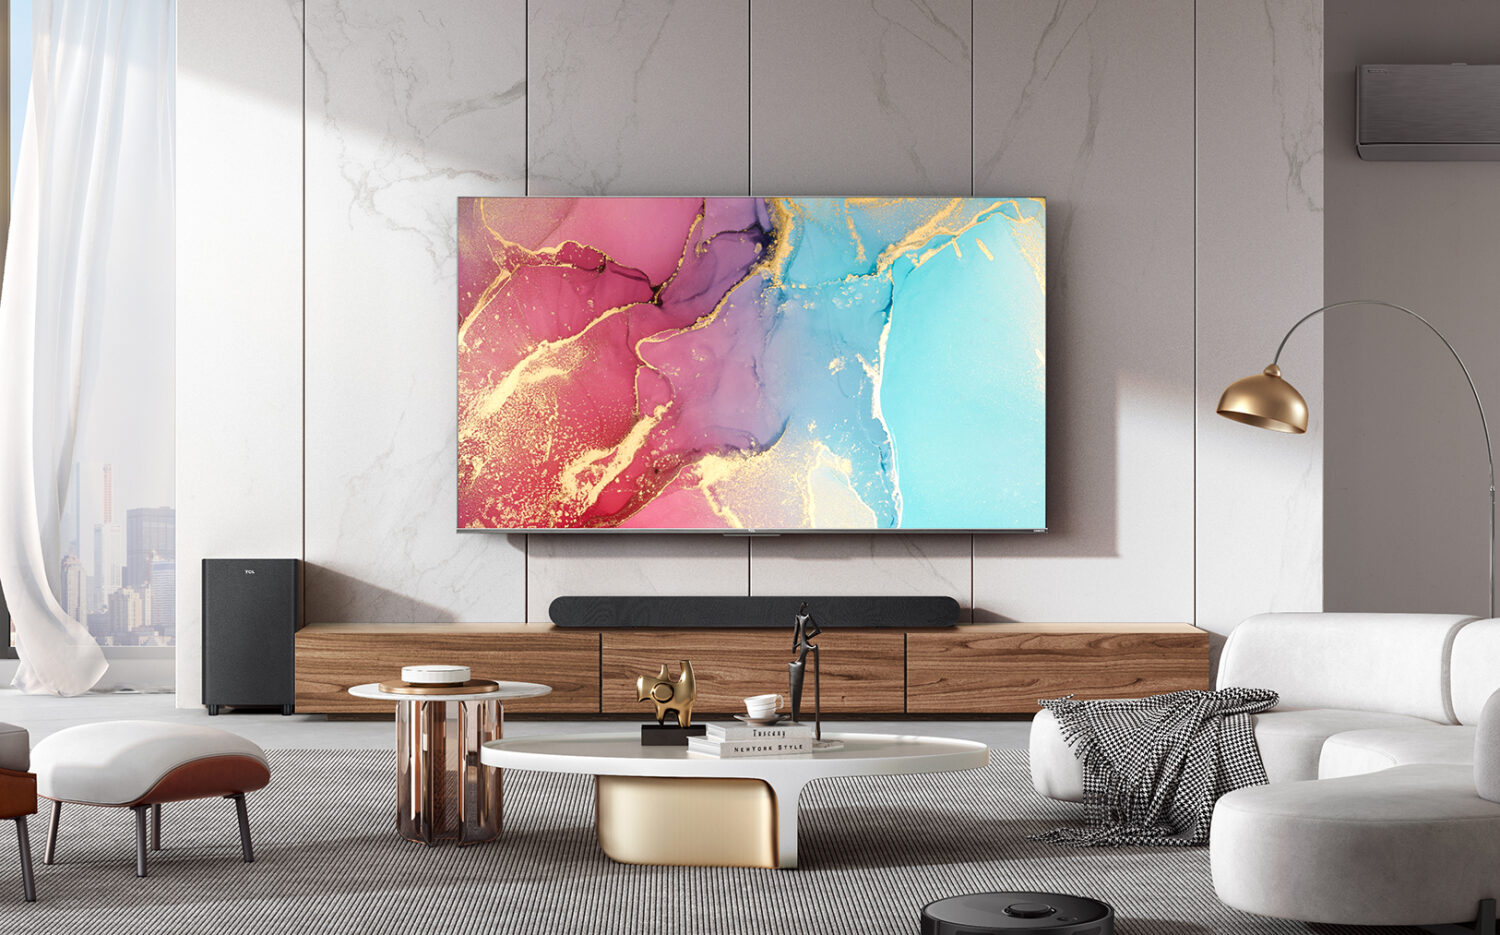 TCL launches new QLED Roku TV – ERT